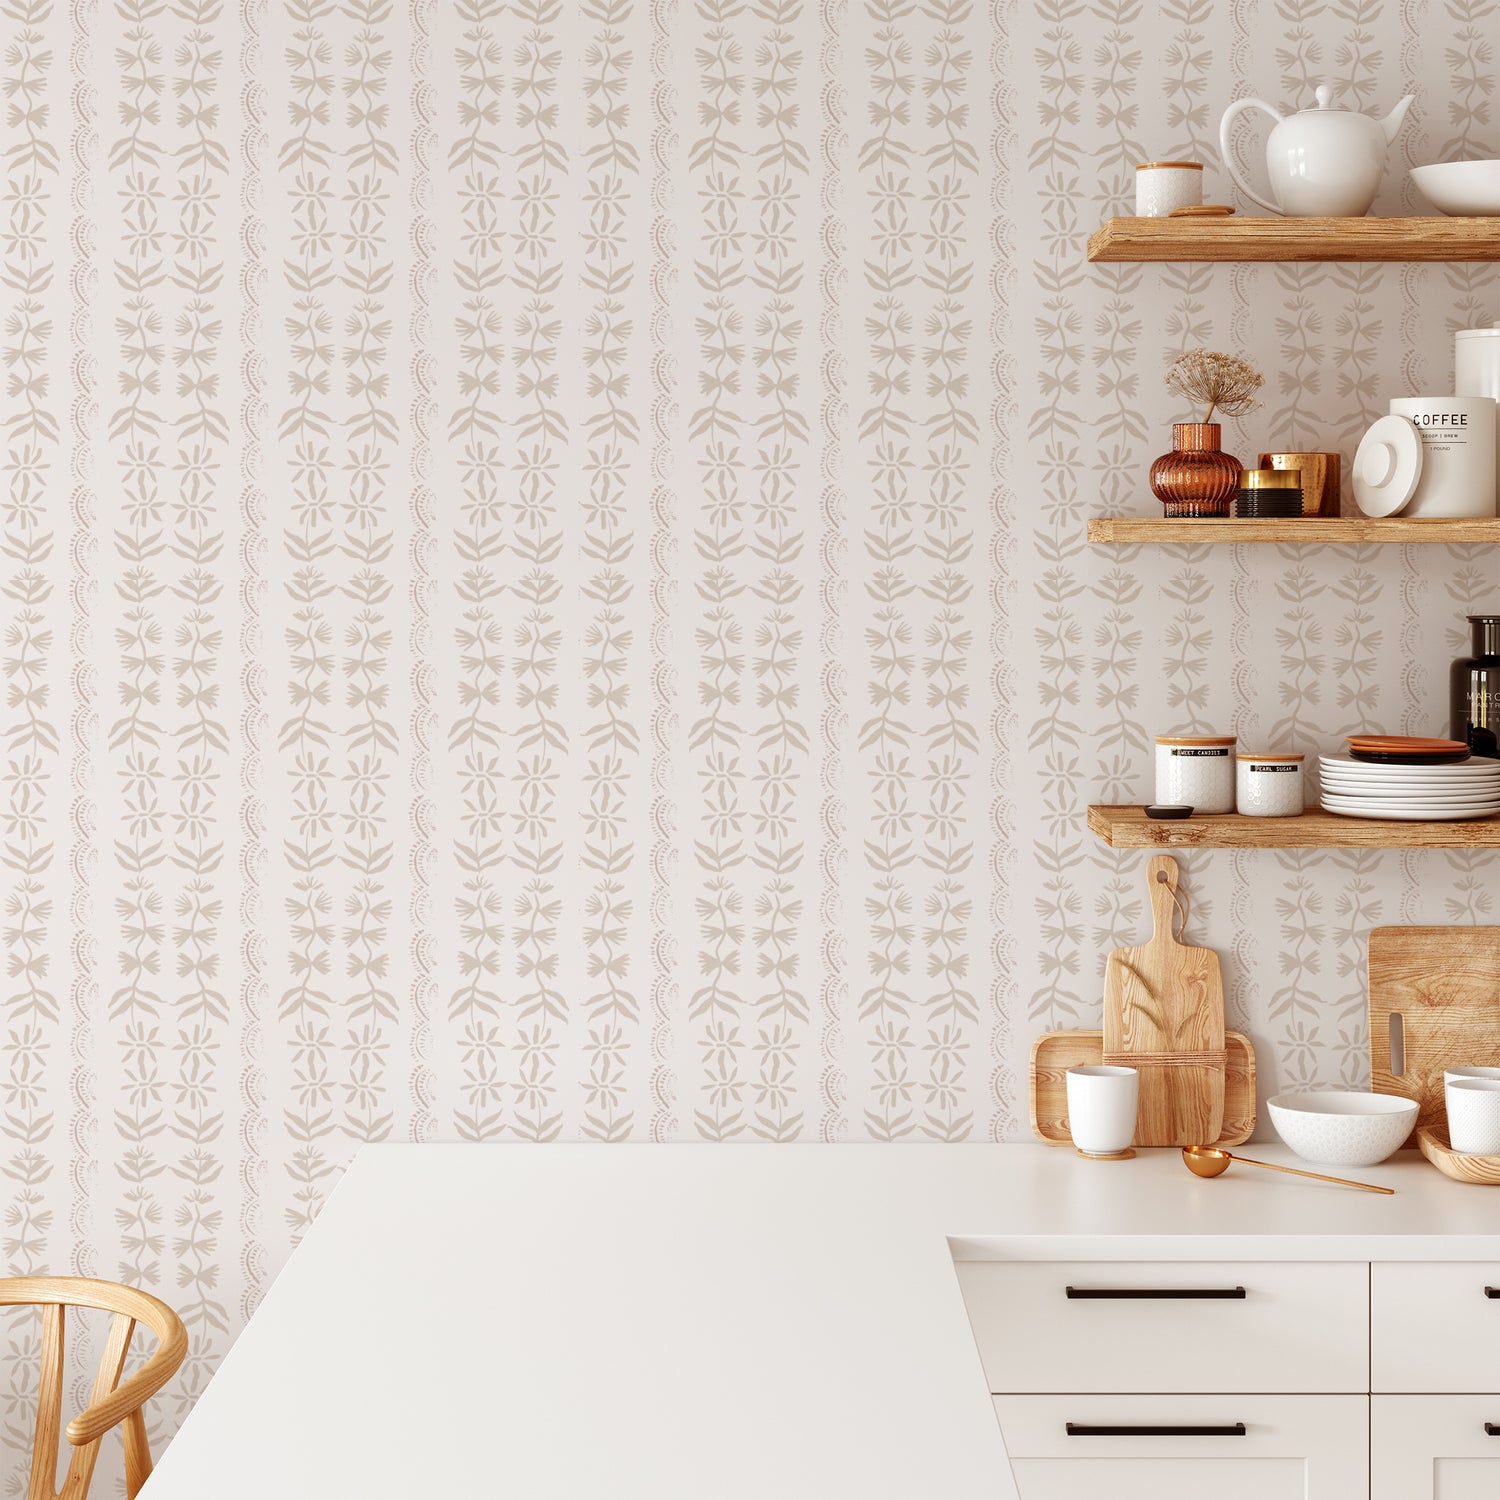 Kitchen wall featuring Emeline Bone design with elegant neutral colors and hand-painted florals.